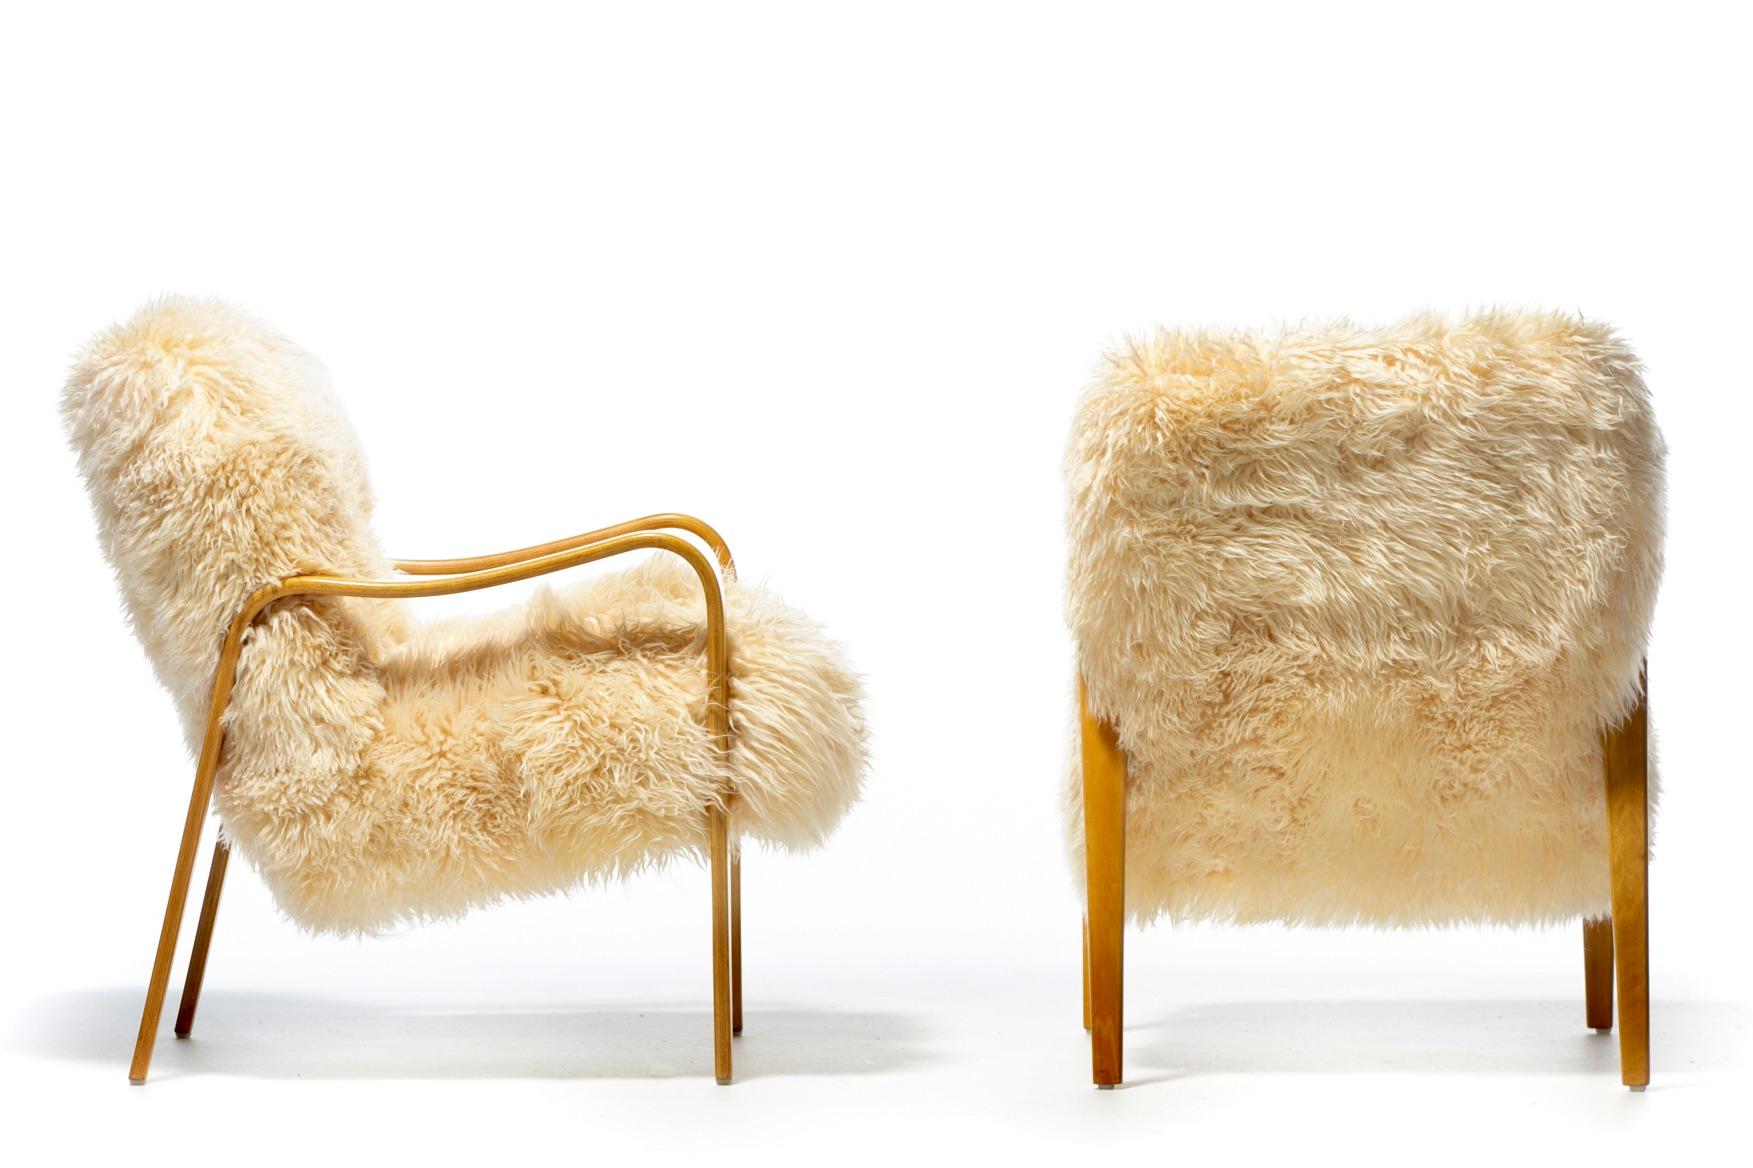 Pair of Vanilla Creme Sheepskin Lounge Chairs with Bentwood Arms by Thonet In Good Condition For Sale In Saint Louis, MO